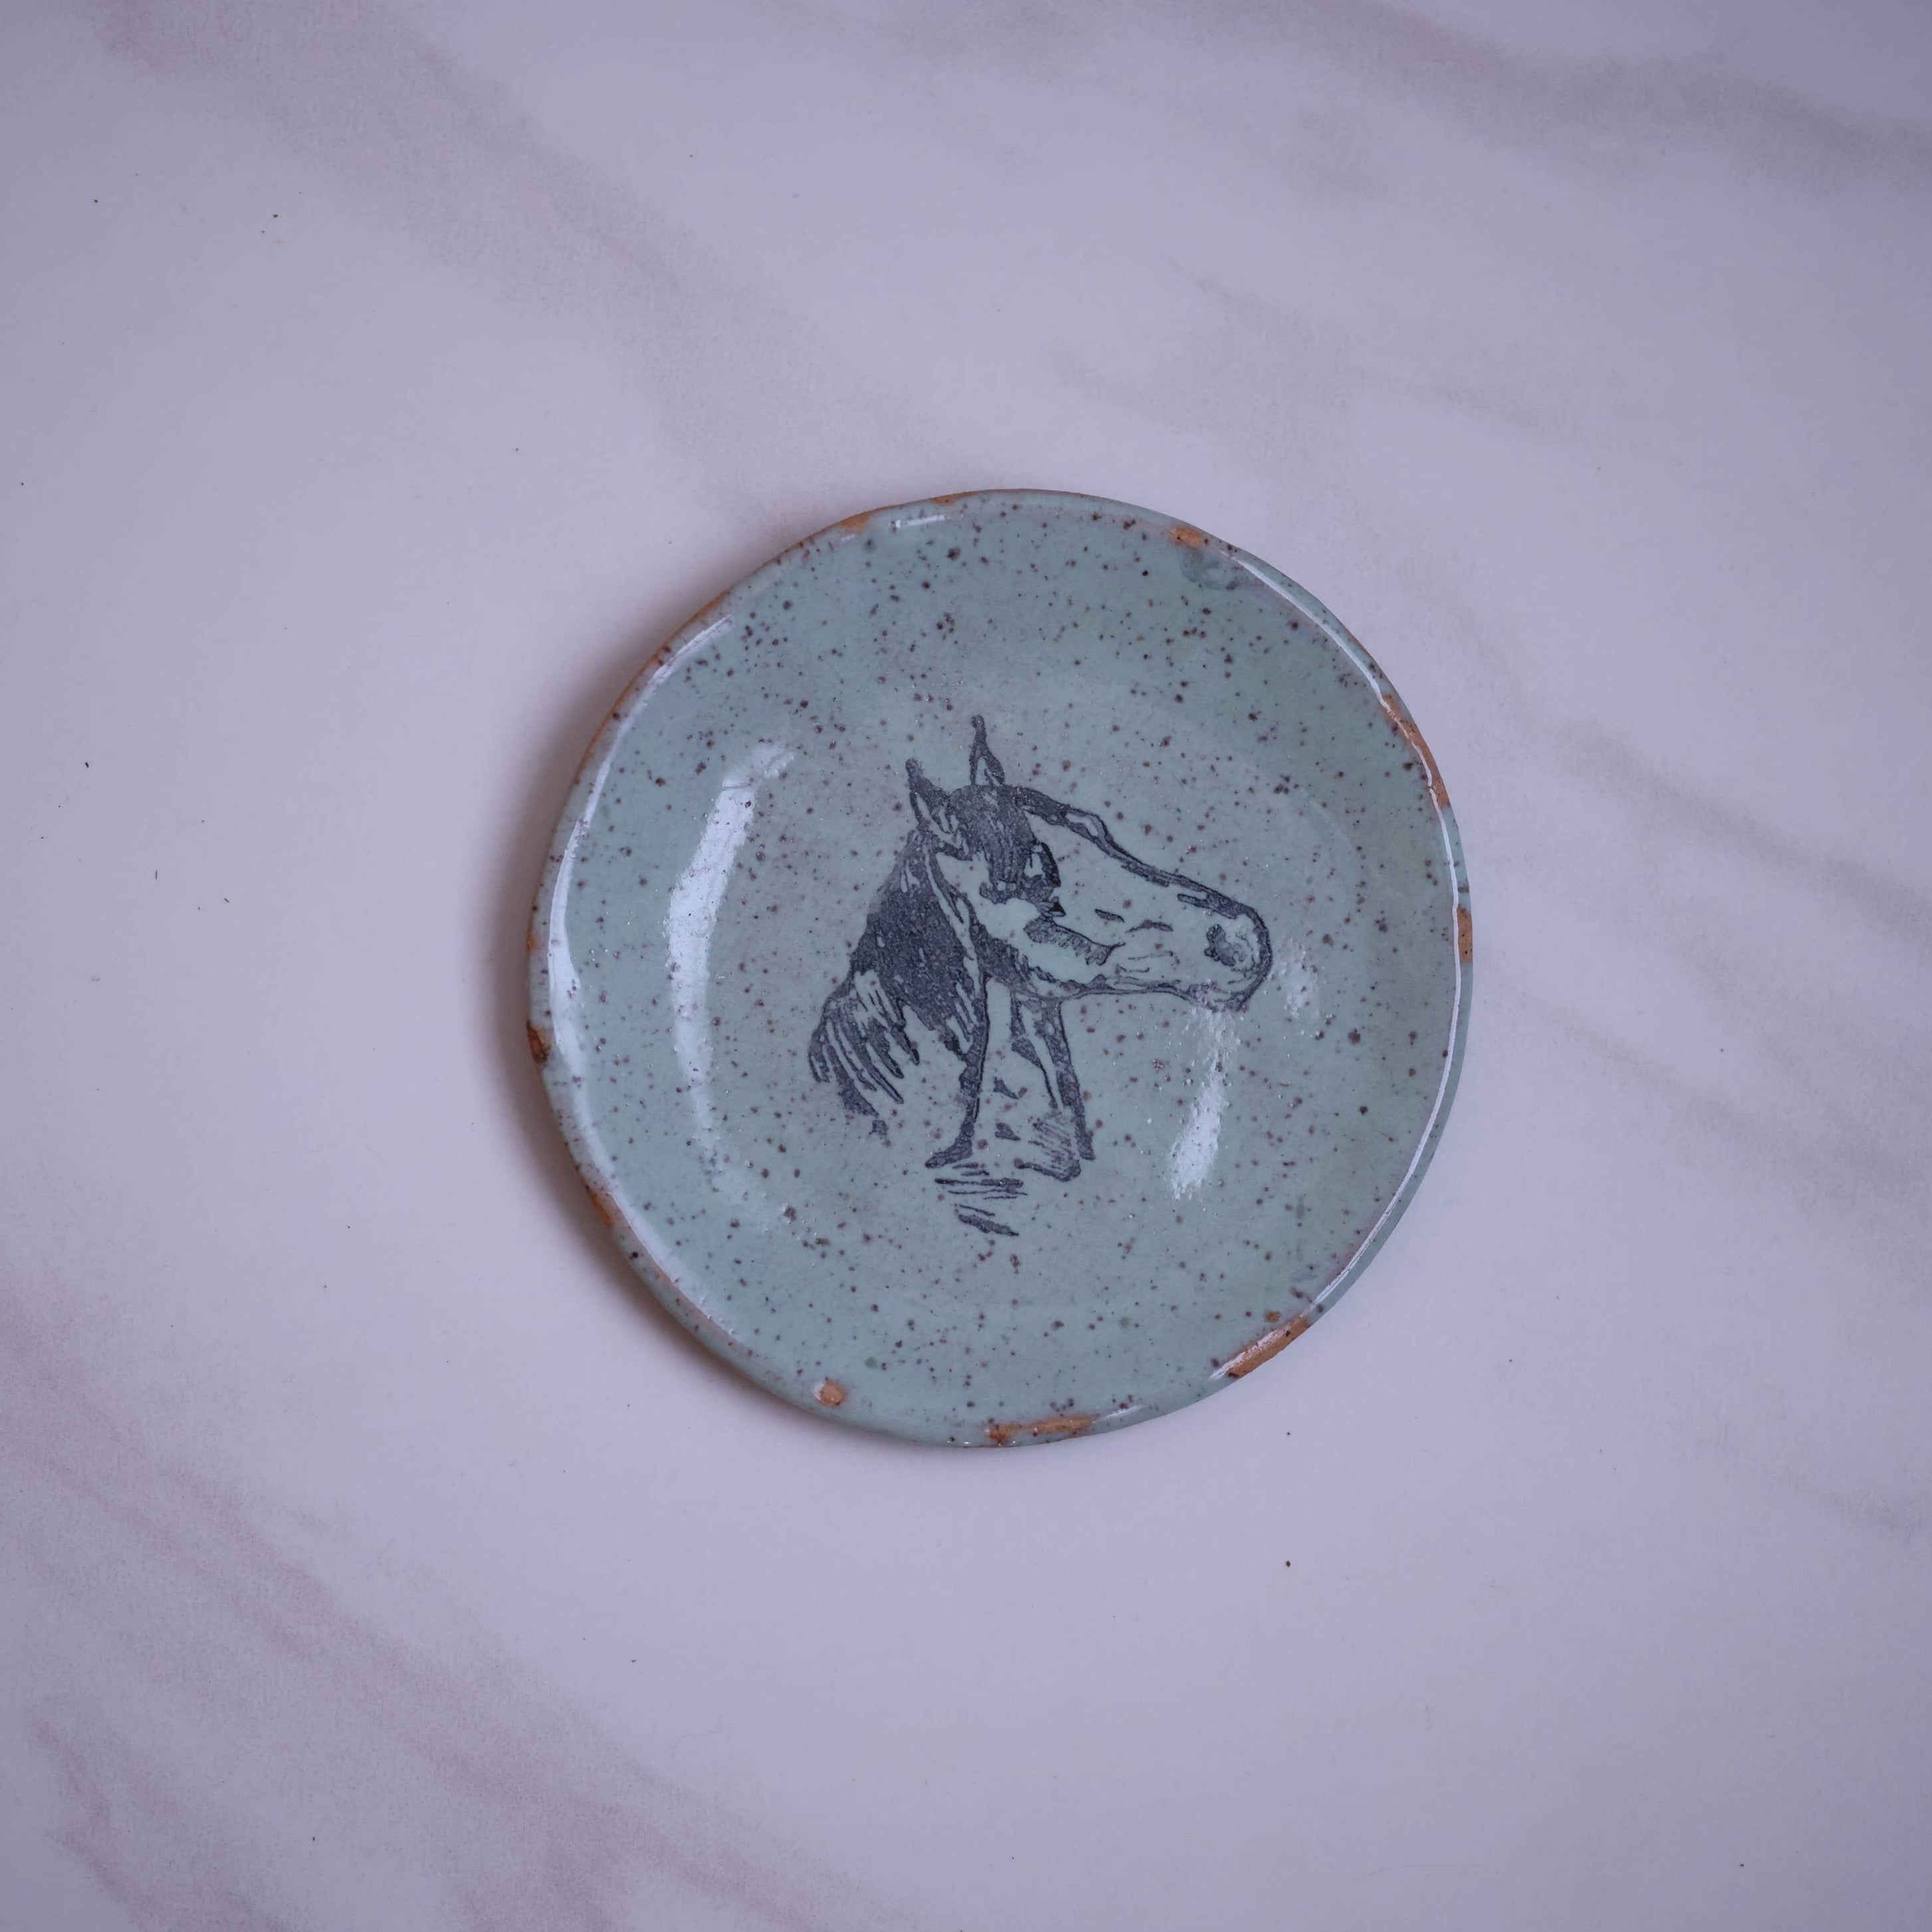 Blue small plate with large printed horse head in center